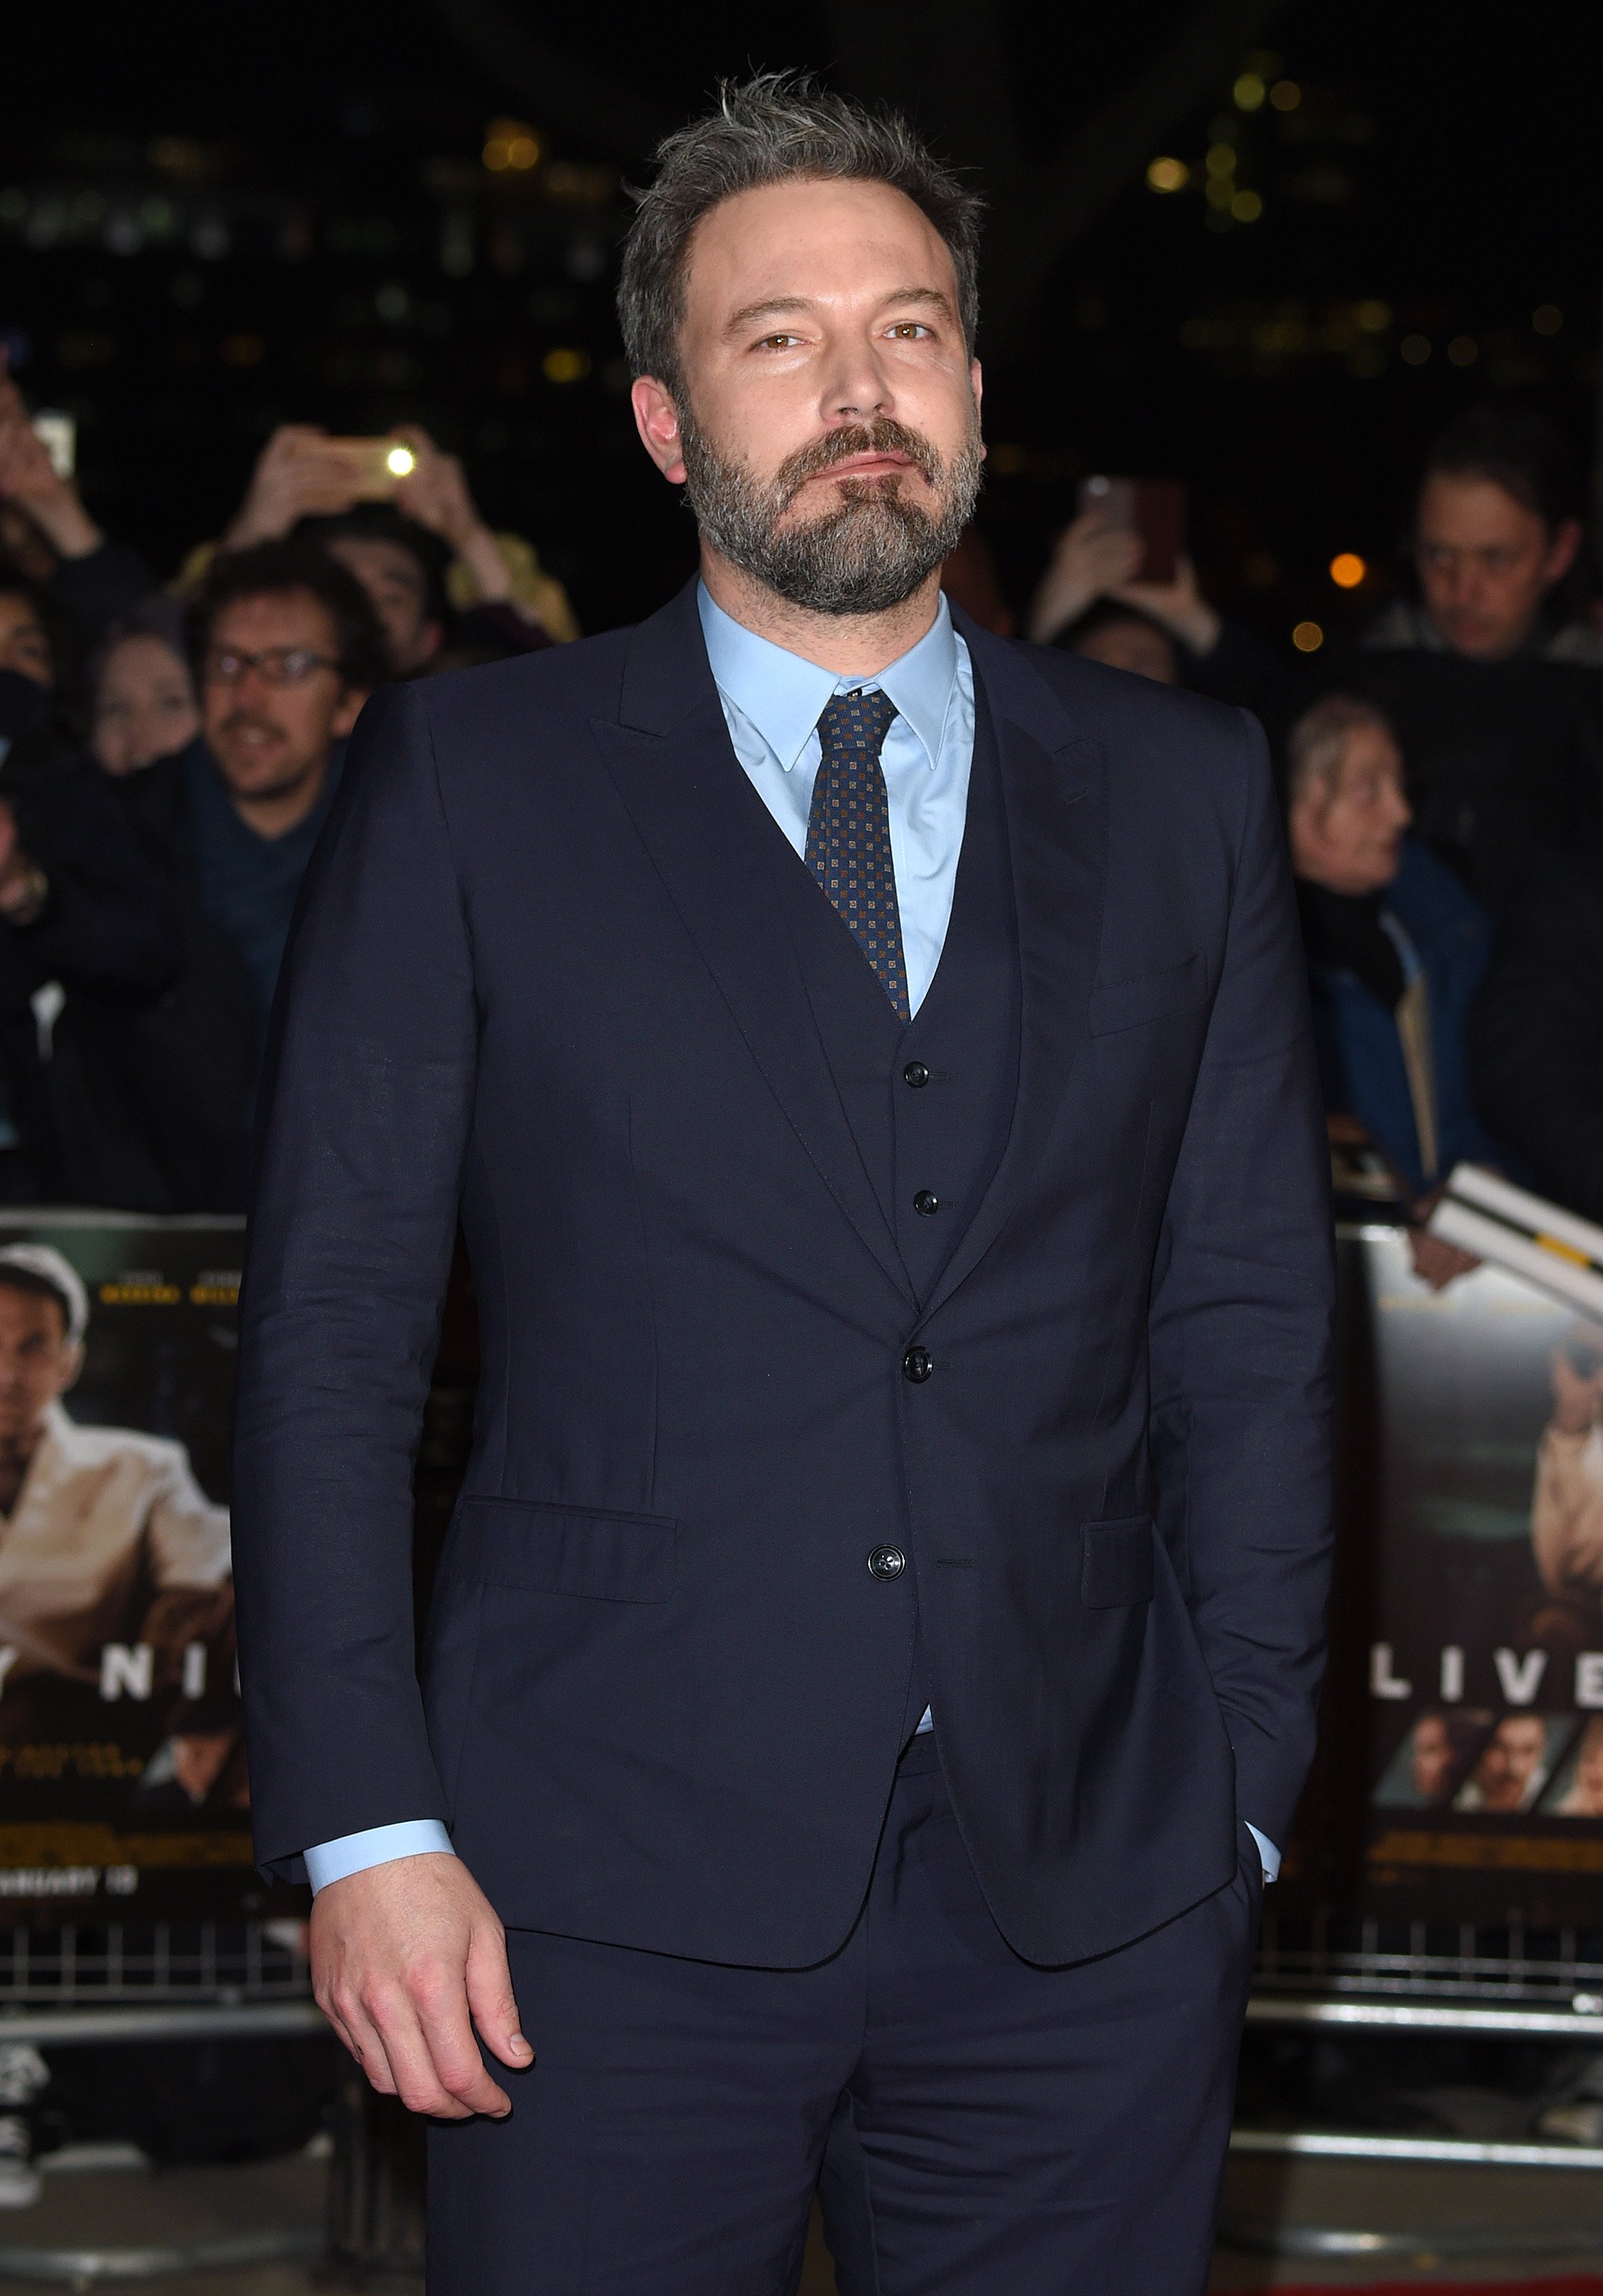 Ben Affleck attends the premiere of "Live By Night" on January 11, 2017 in London, United Kingdom.  | Source: Getty Images